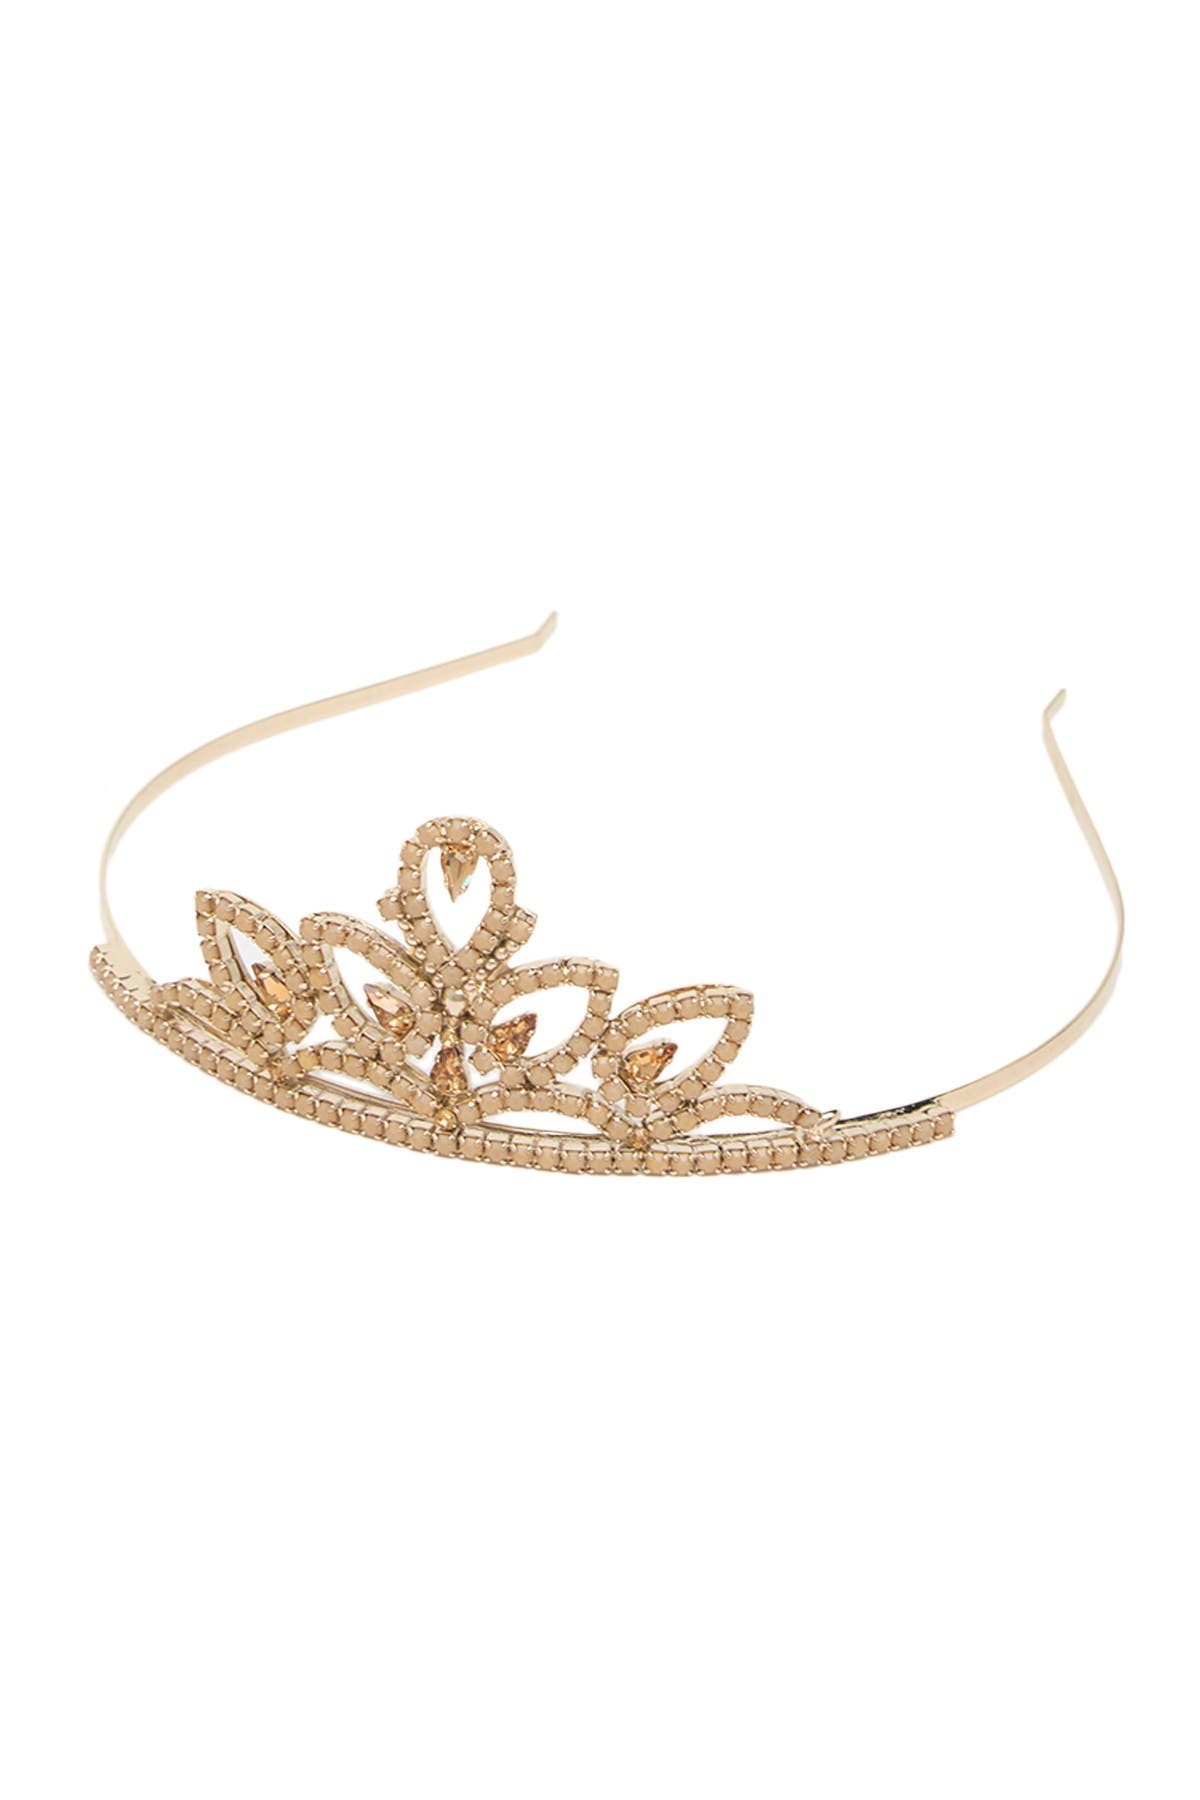 Red Valentino Embellished Tiara In L01 Oro